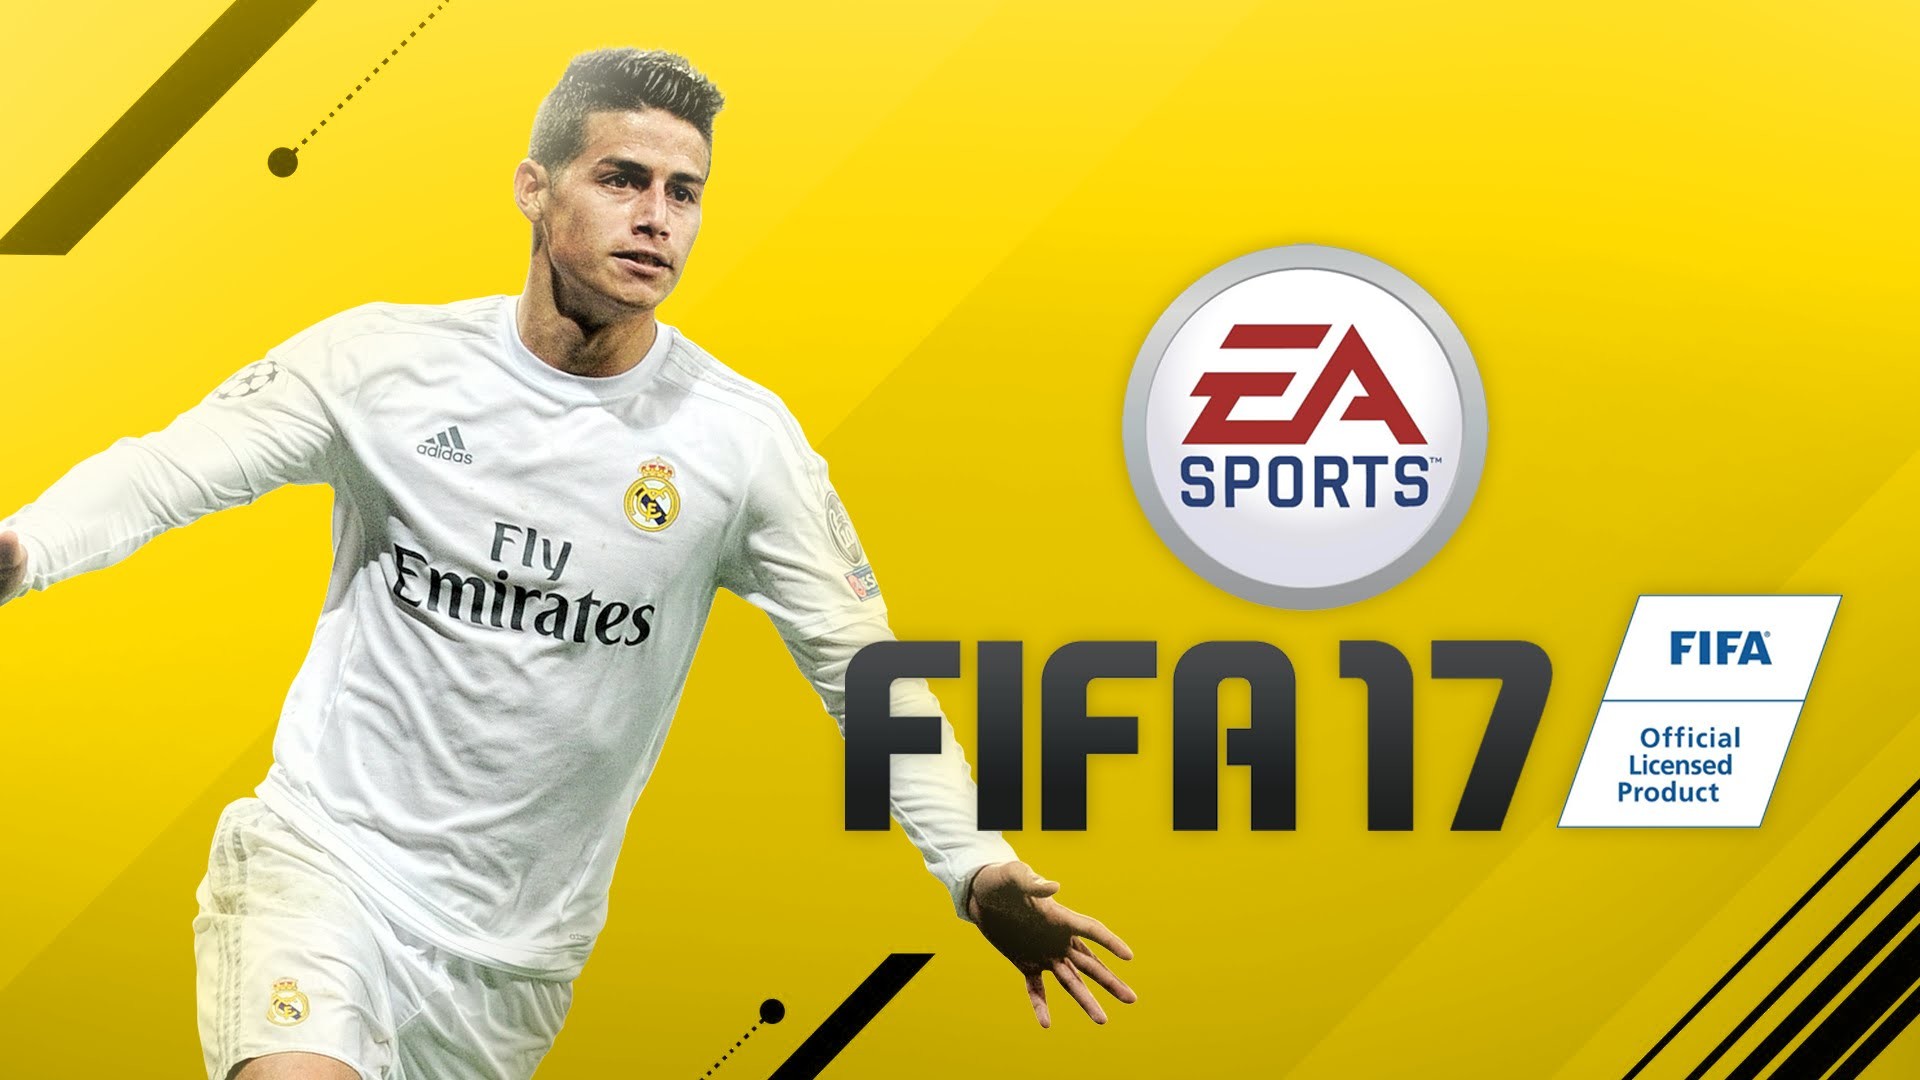 1920x1080 Fifa 2017 Wallpapers (47 Wallpapers)